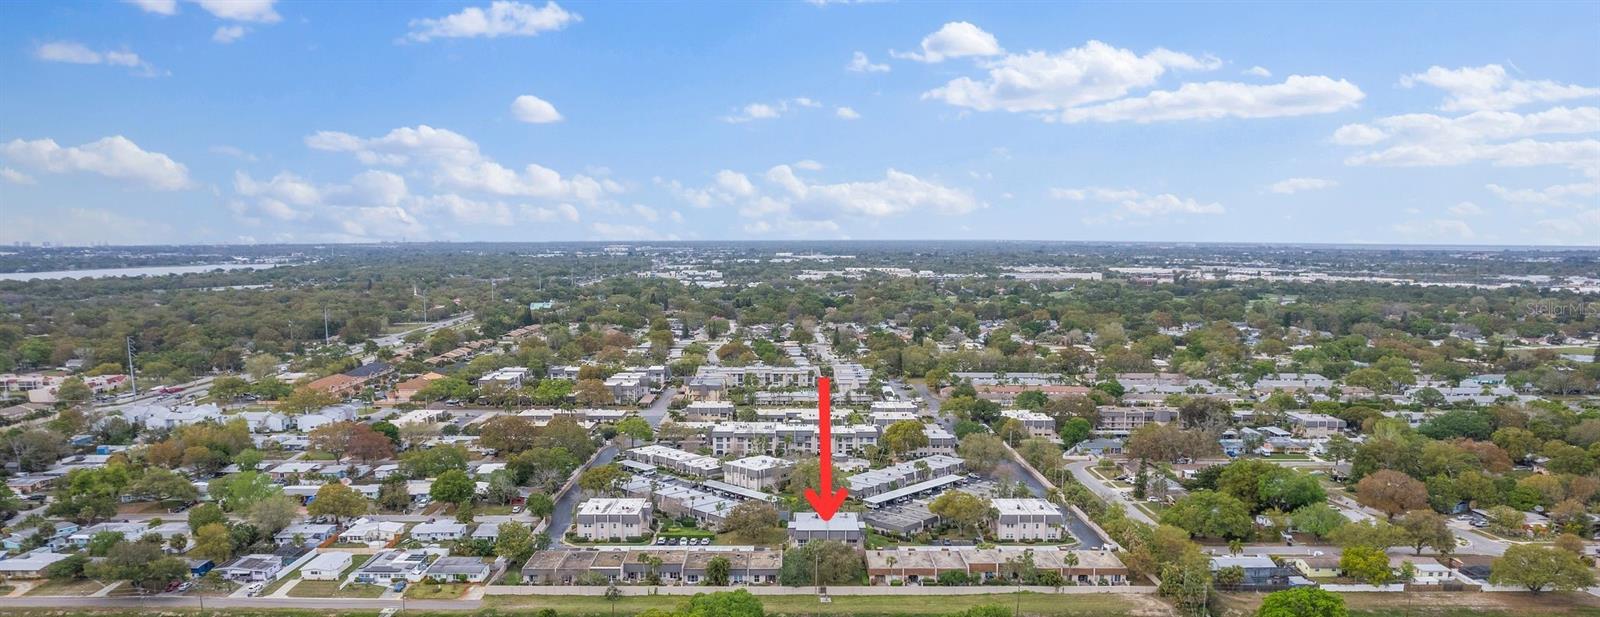 Red Arrow Points out Bldg 14